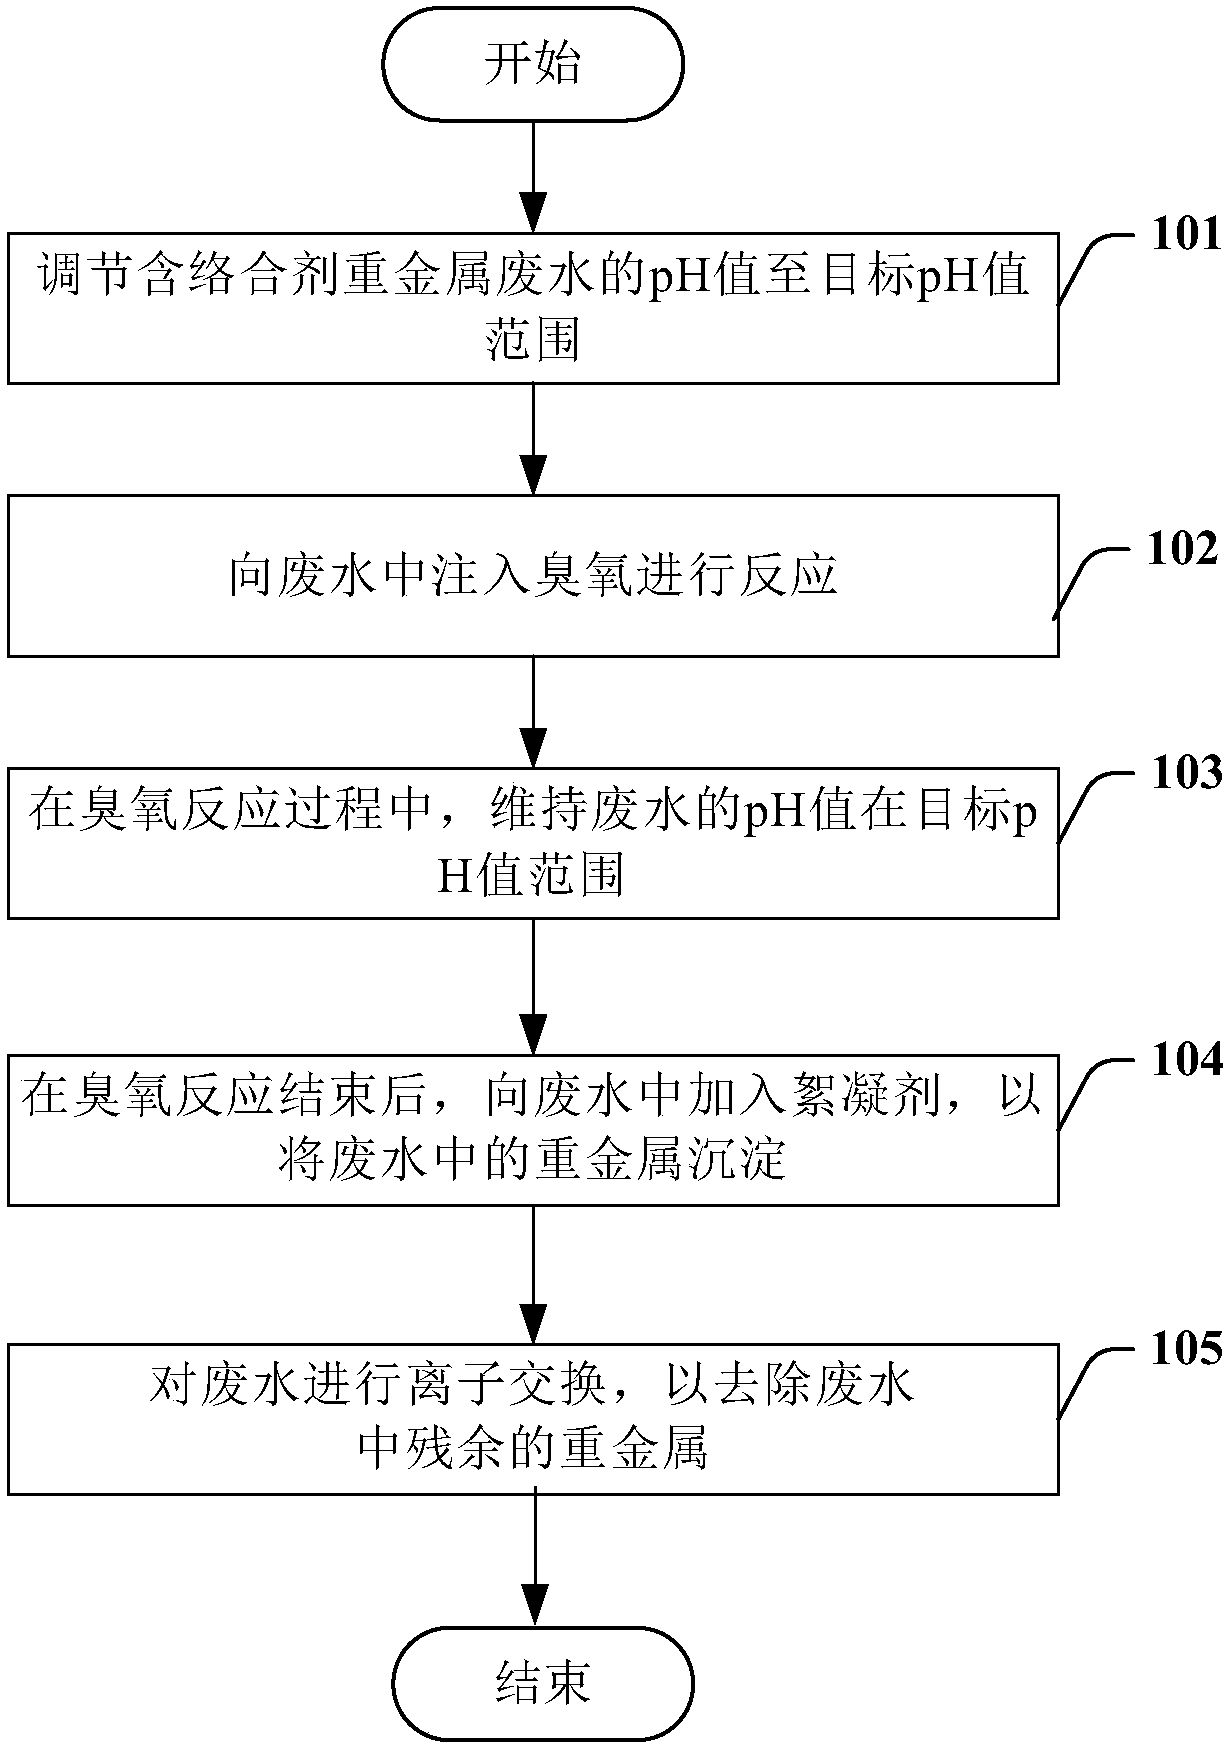 Processing method and equipment of complexing agent containing heavy metal waste water